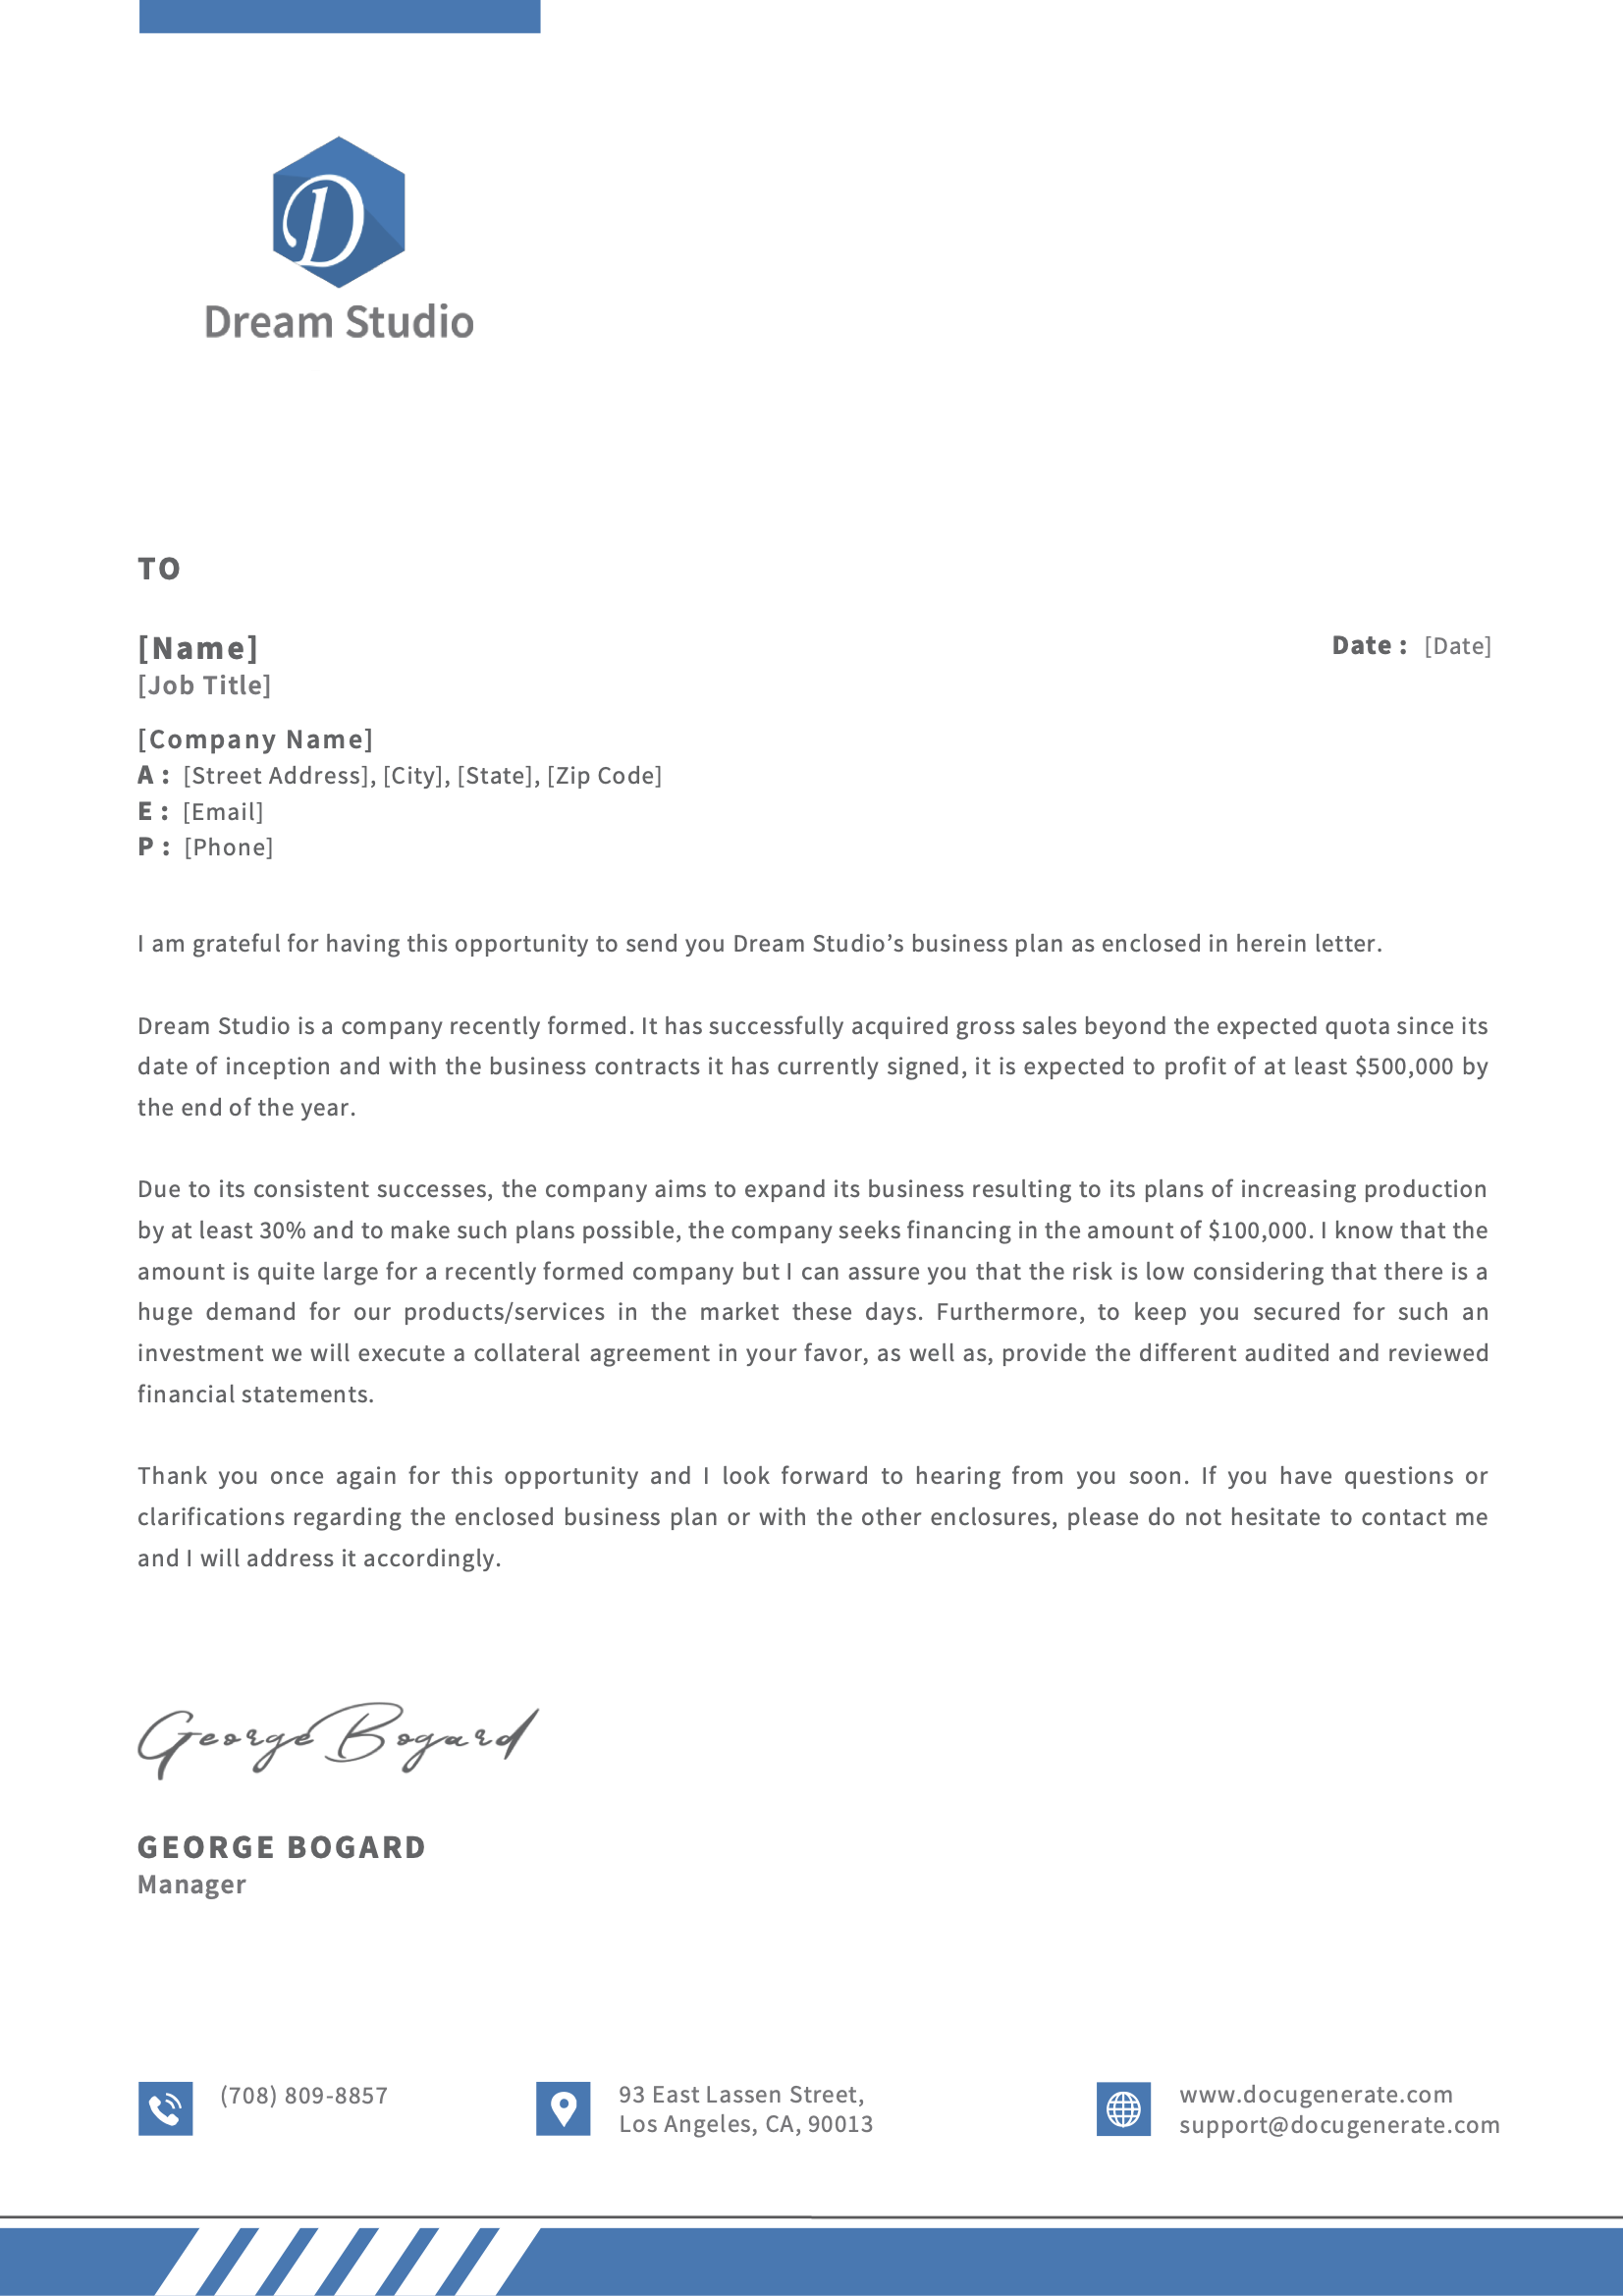 Business Letter Template